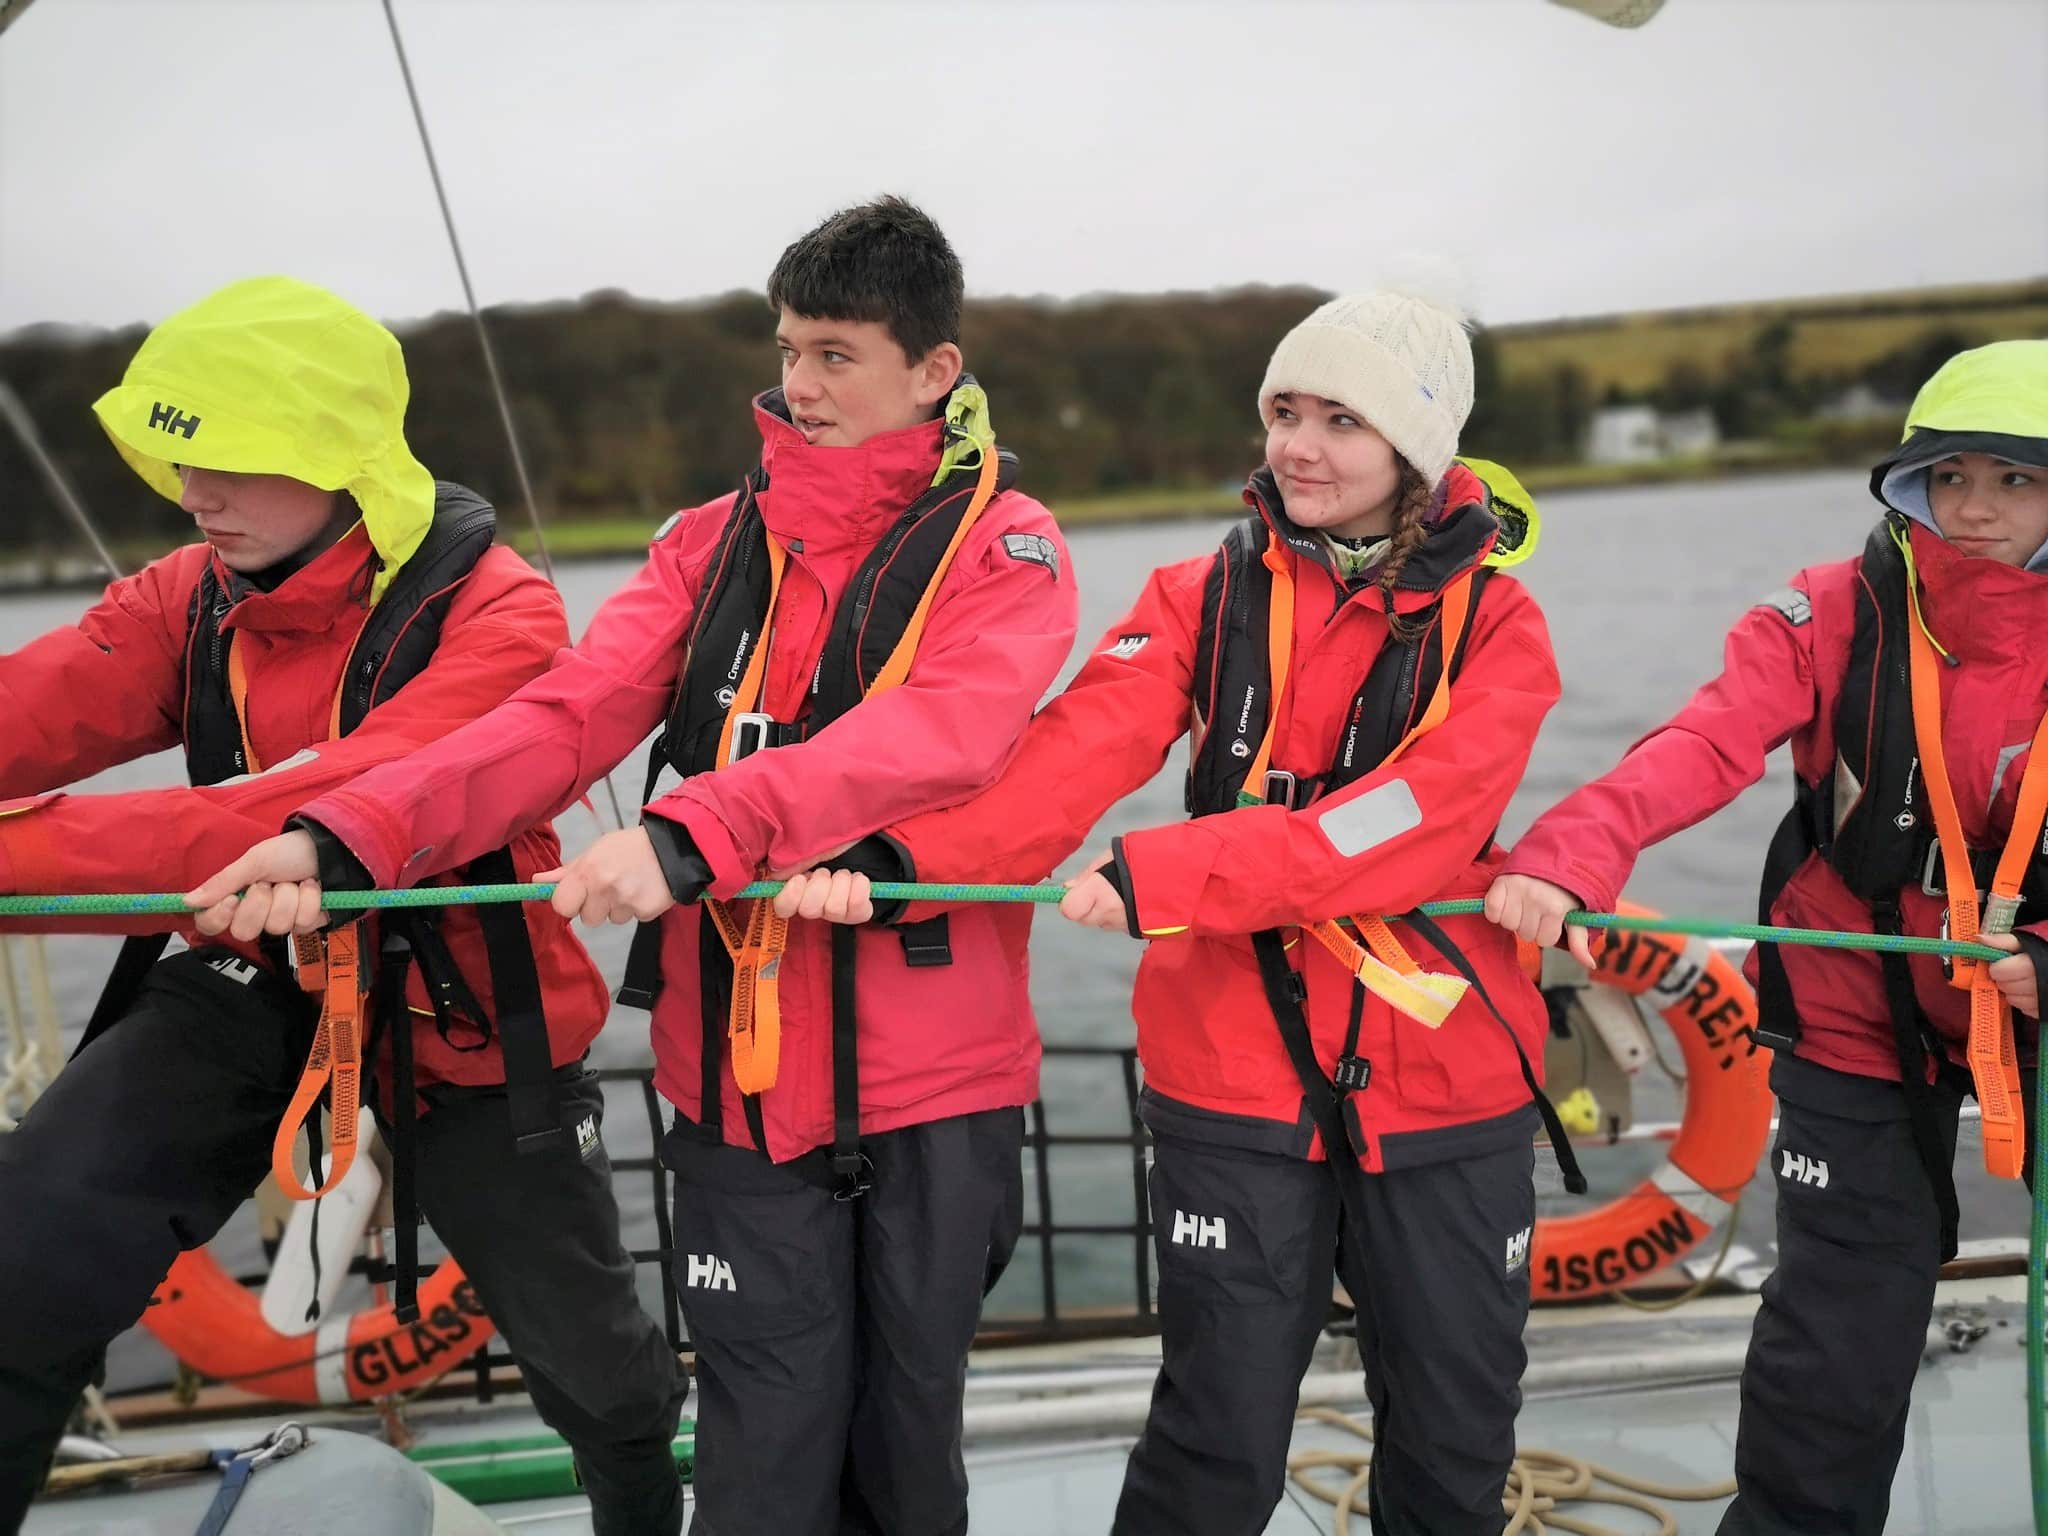 Ahoy there! Ocean Youth Trust awarded £10,000